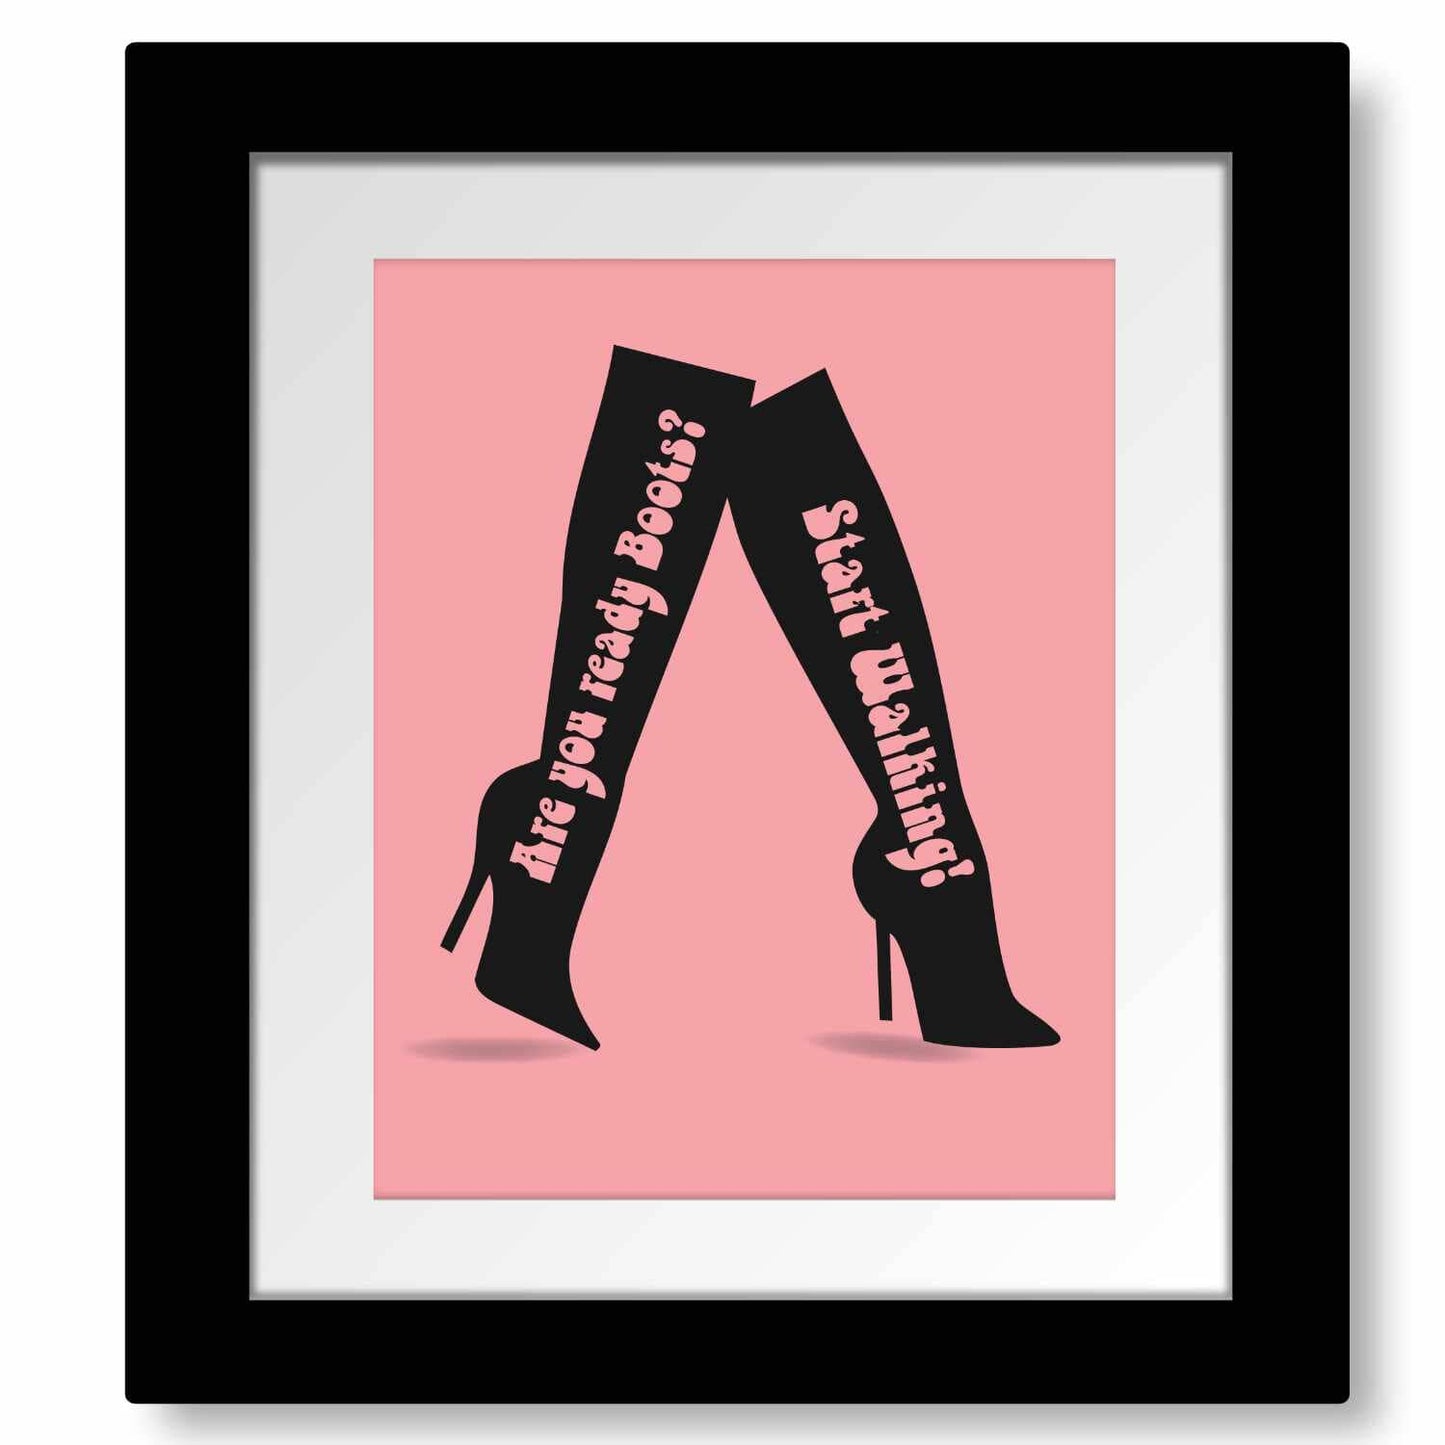 These Boots Are Made for Walkin' by Nancy Sinatra - 60s Art Song Lyrics Art Song Lyrics Art 8x10 Matted and Framed Print 